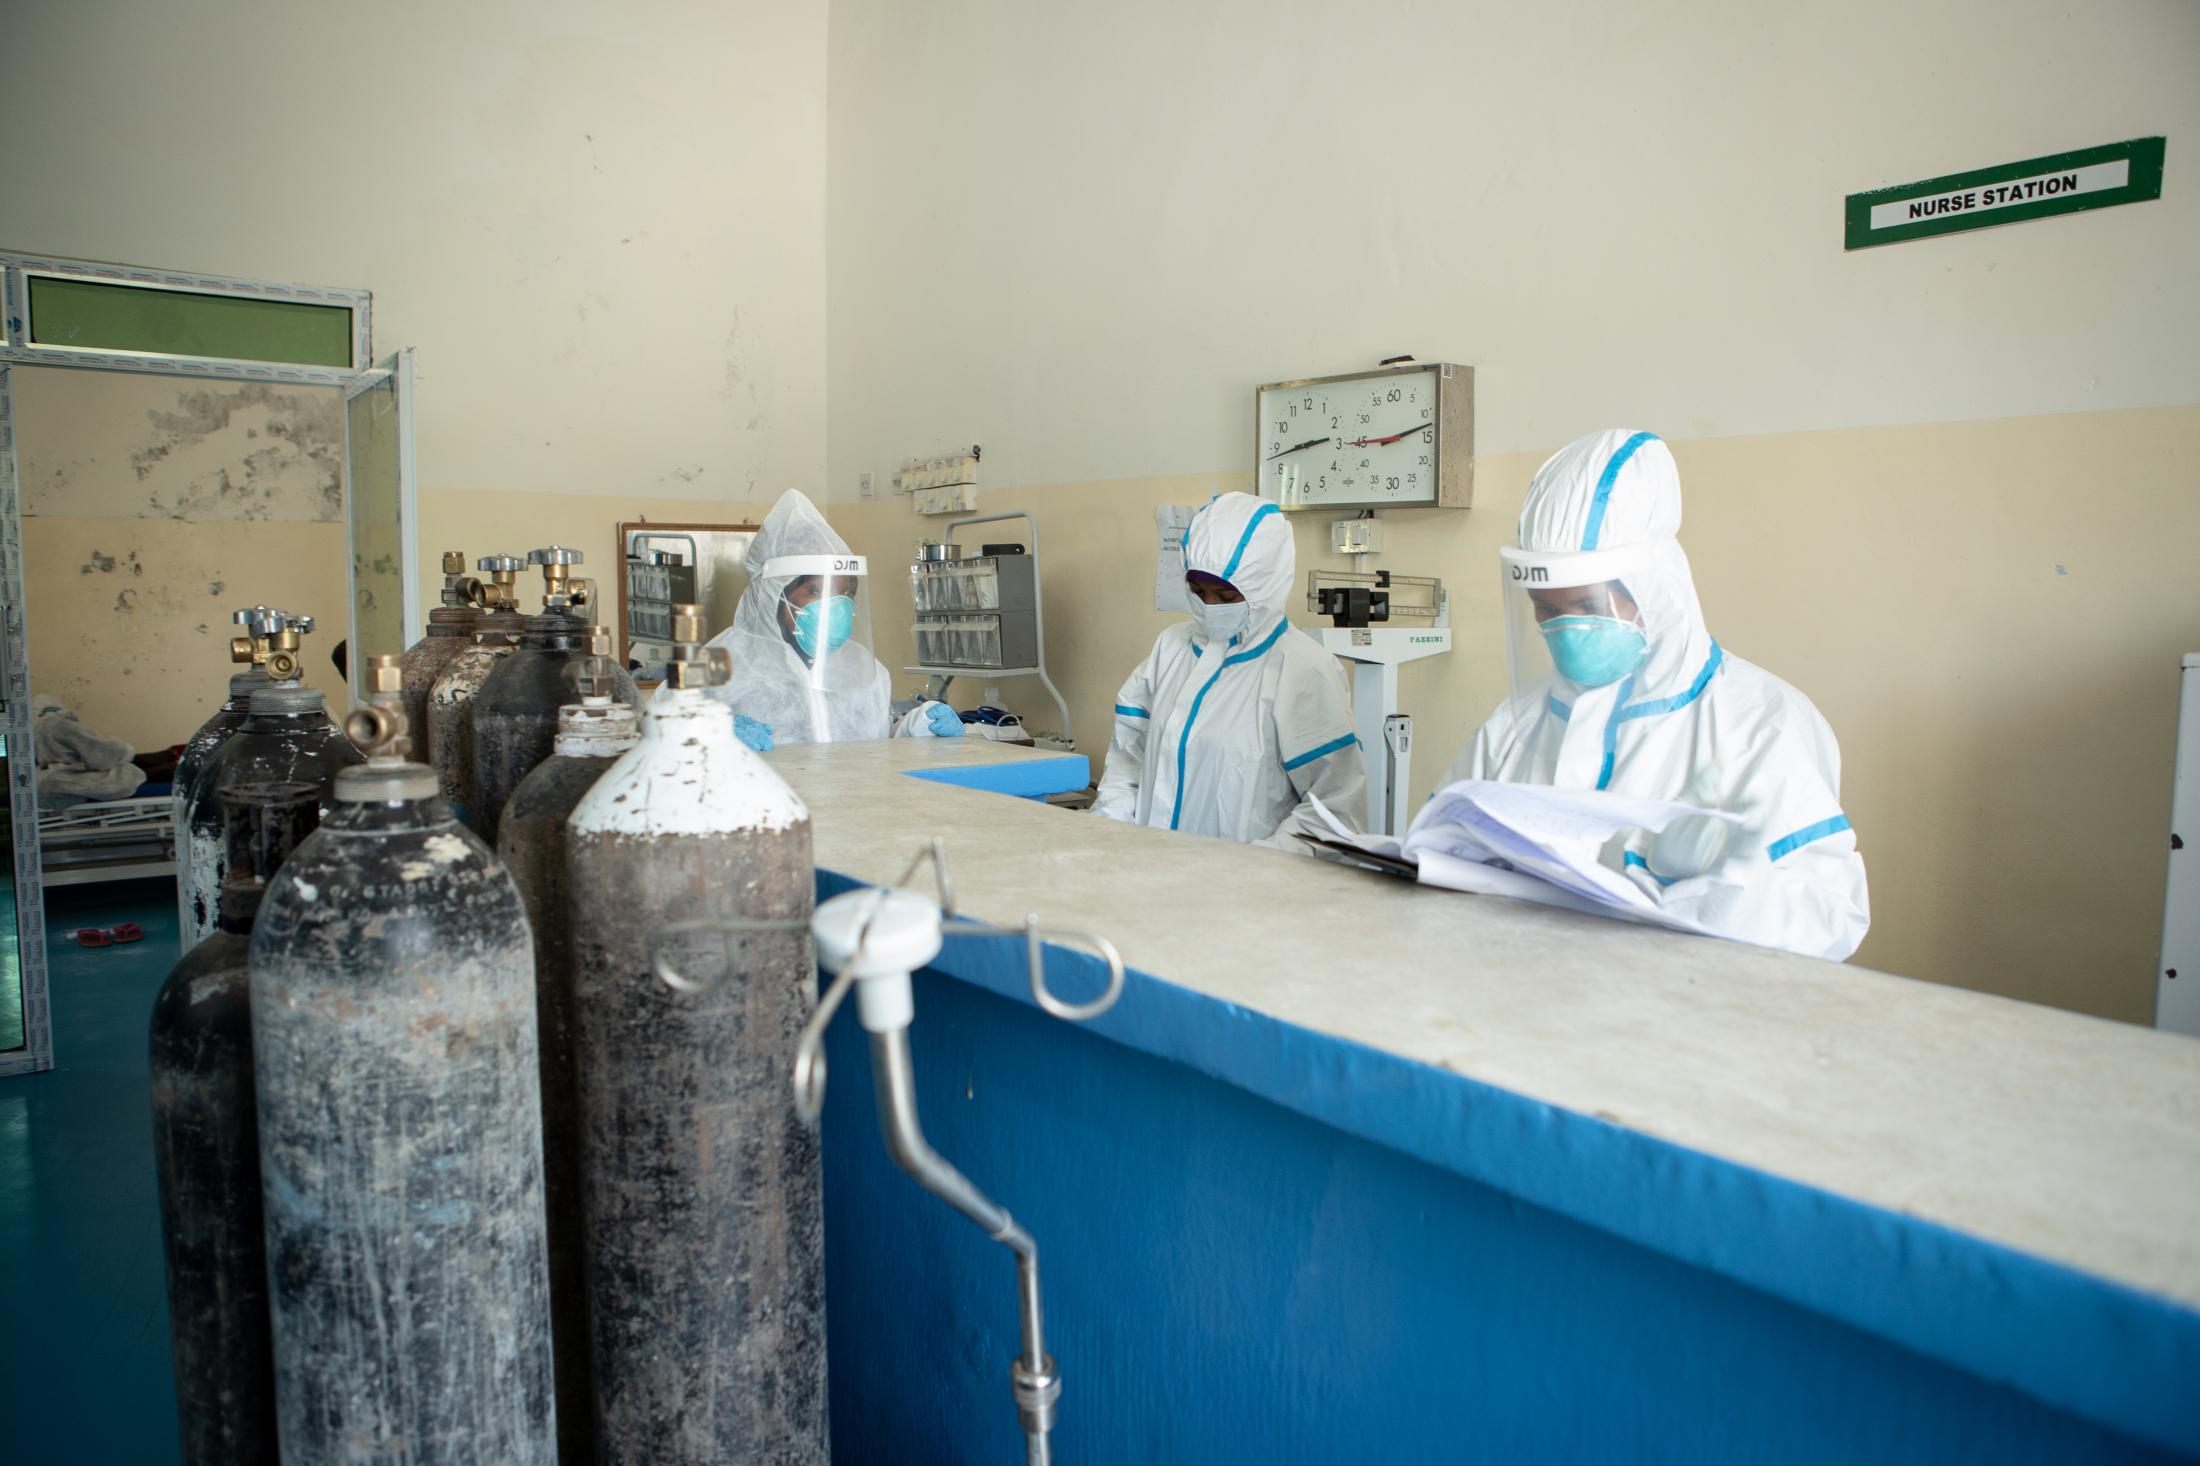 A day at a COVID -19 treatment centre in Somalia - Nurses work from the counter where they monitor the...